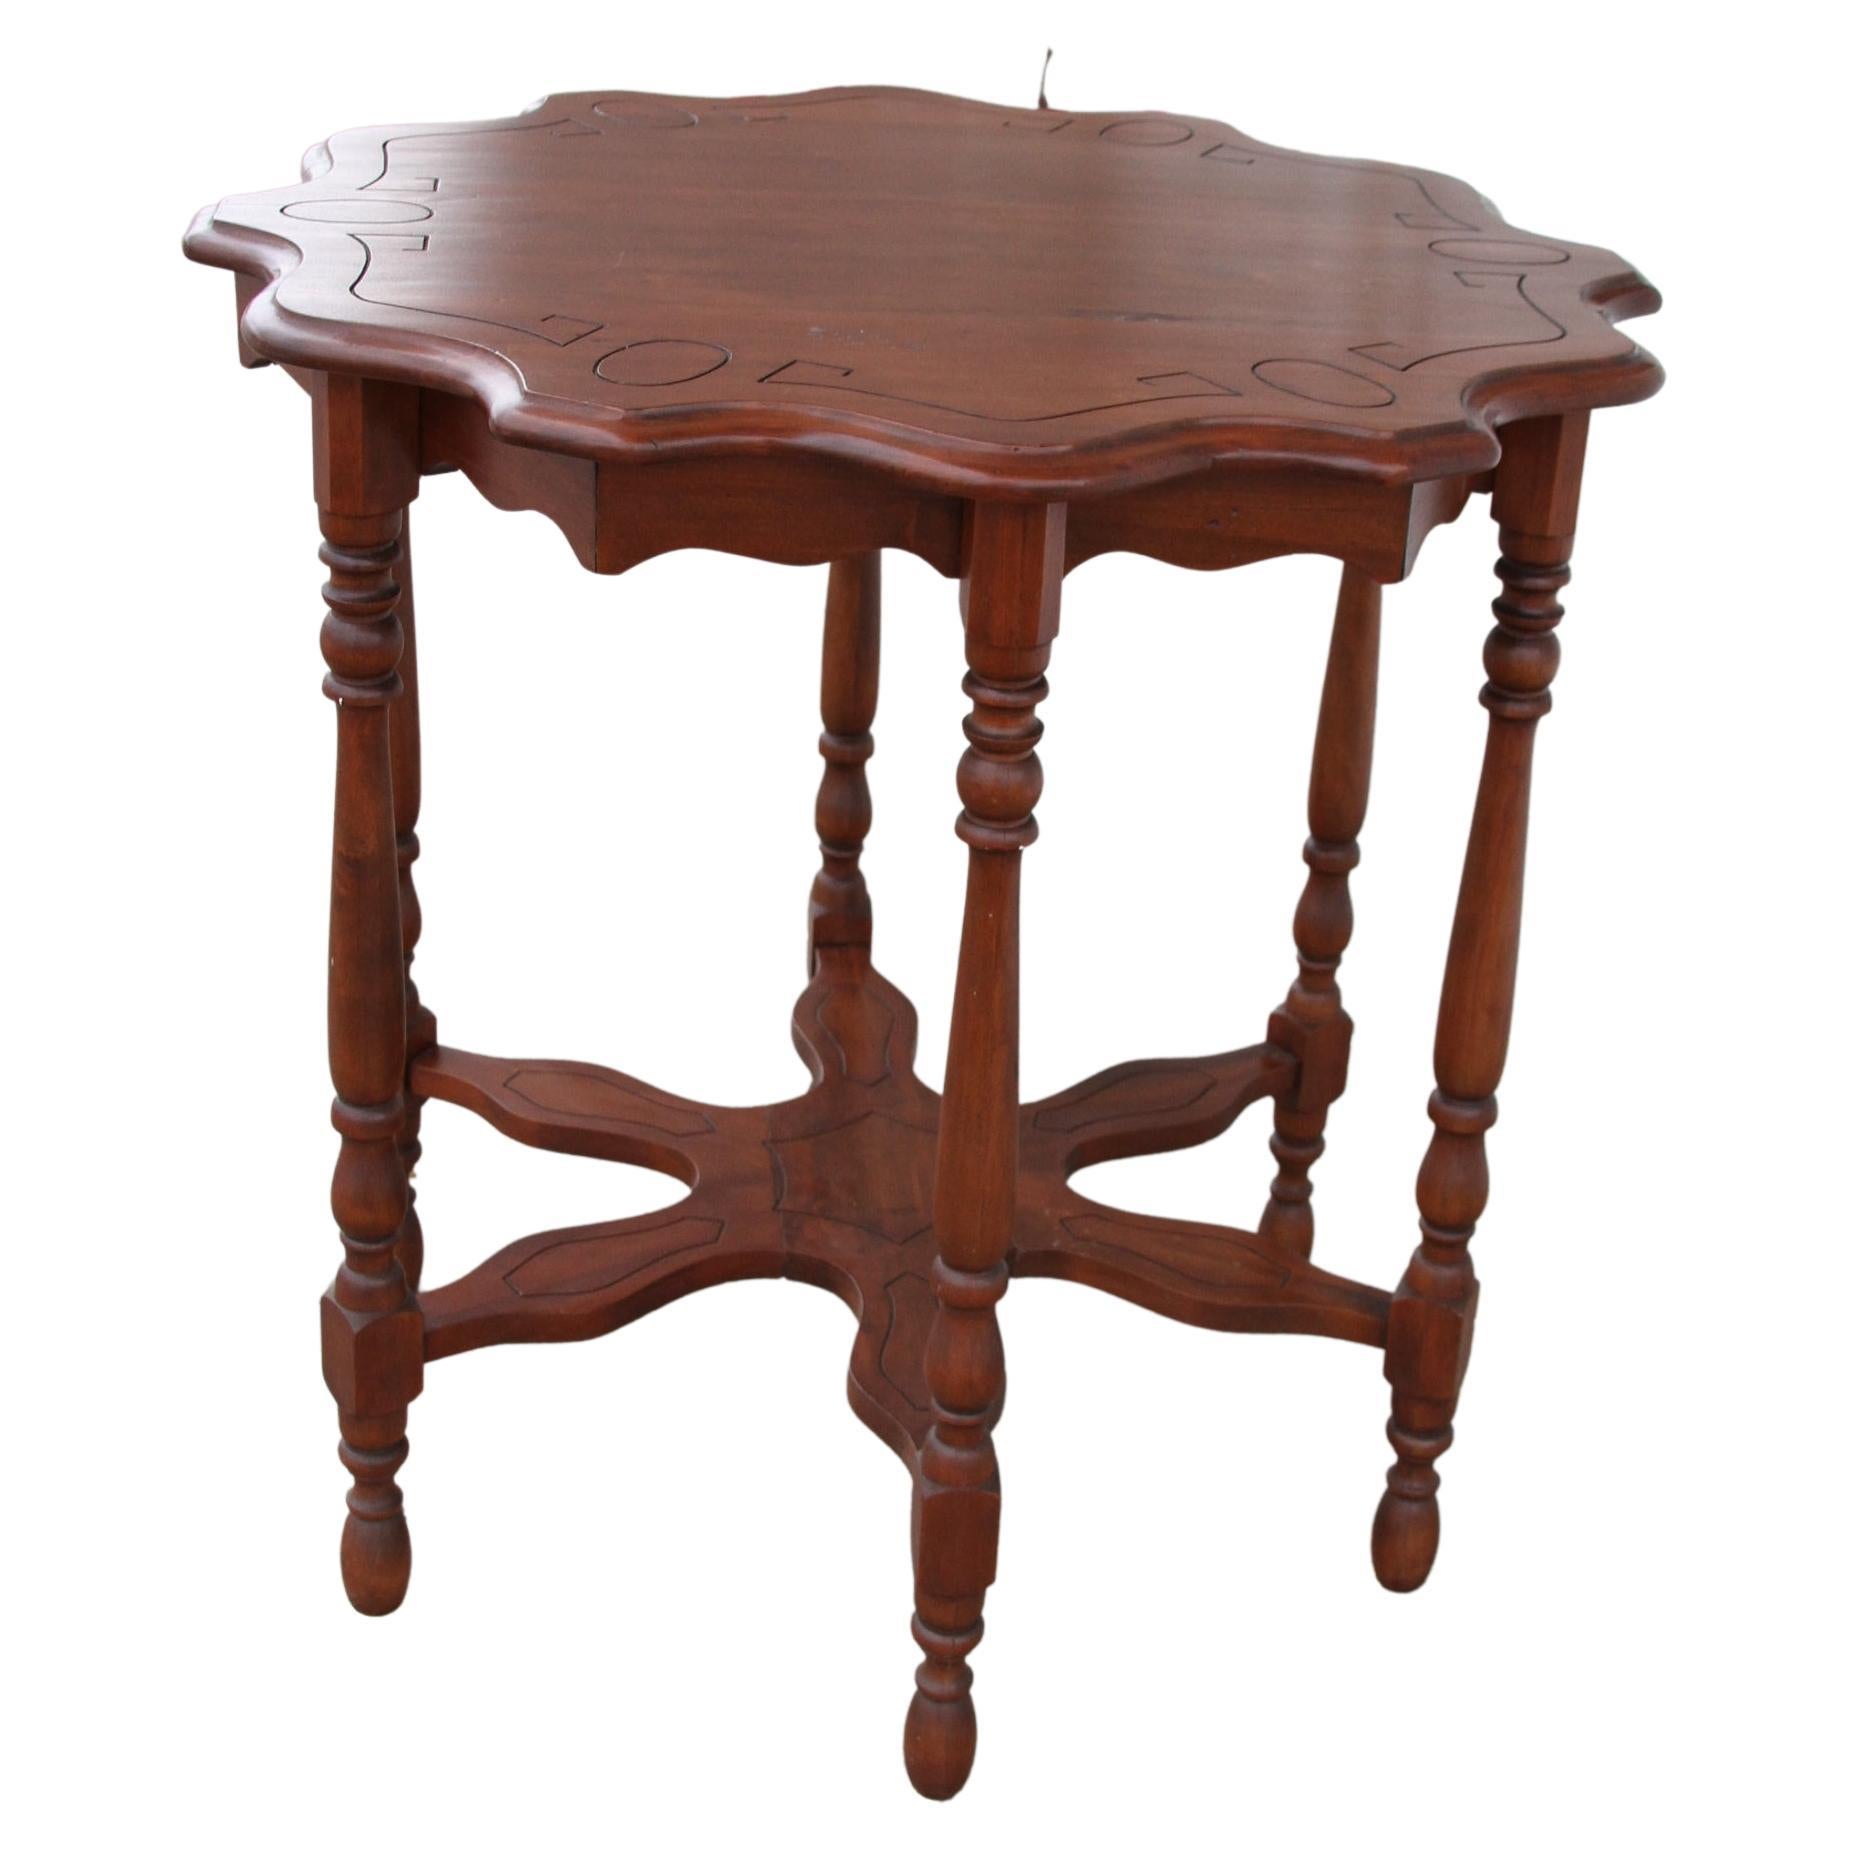 Vintage 6 Leg Scalloped Sided Table For Sale